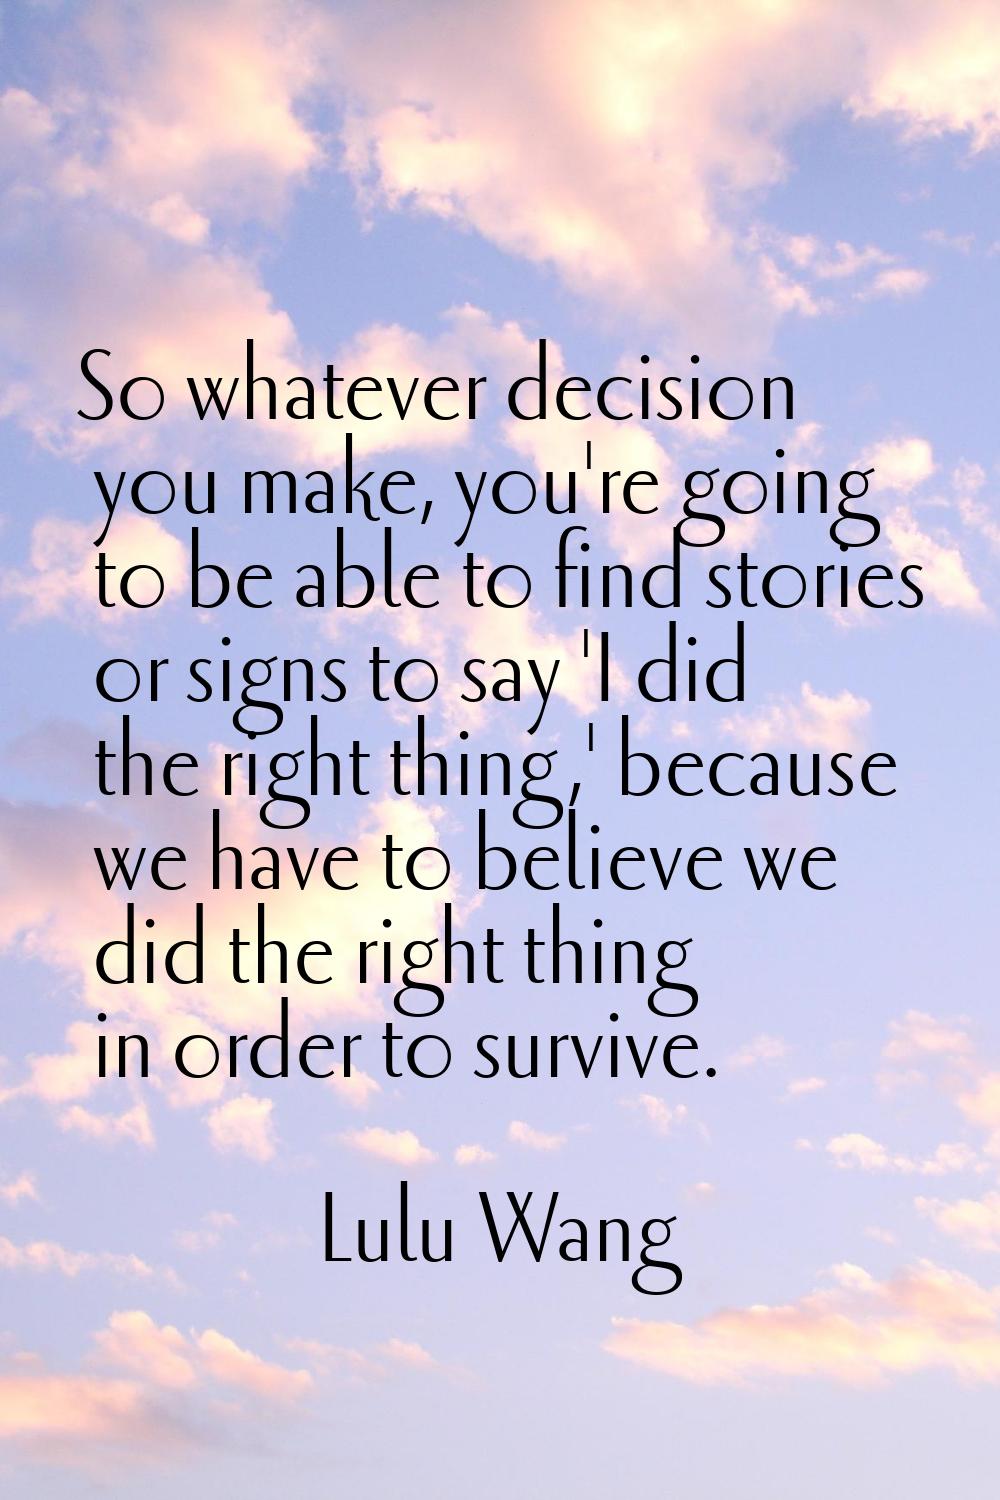 So whatever decision you make, you're going to be able to find stories or signs to say 'I did the r